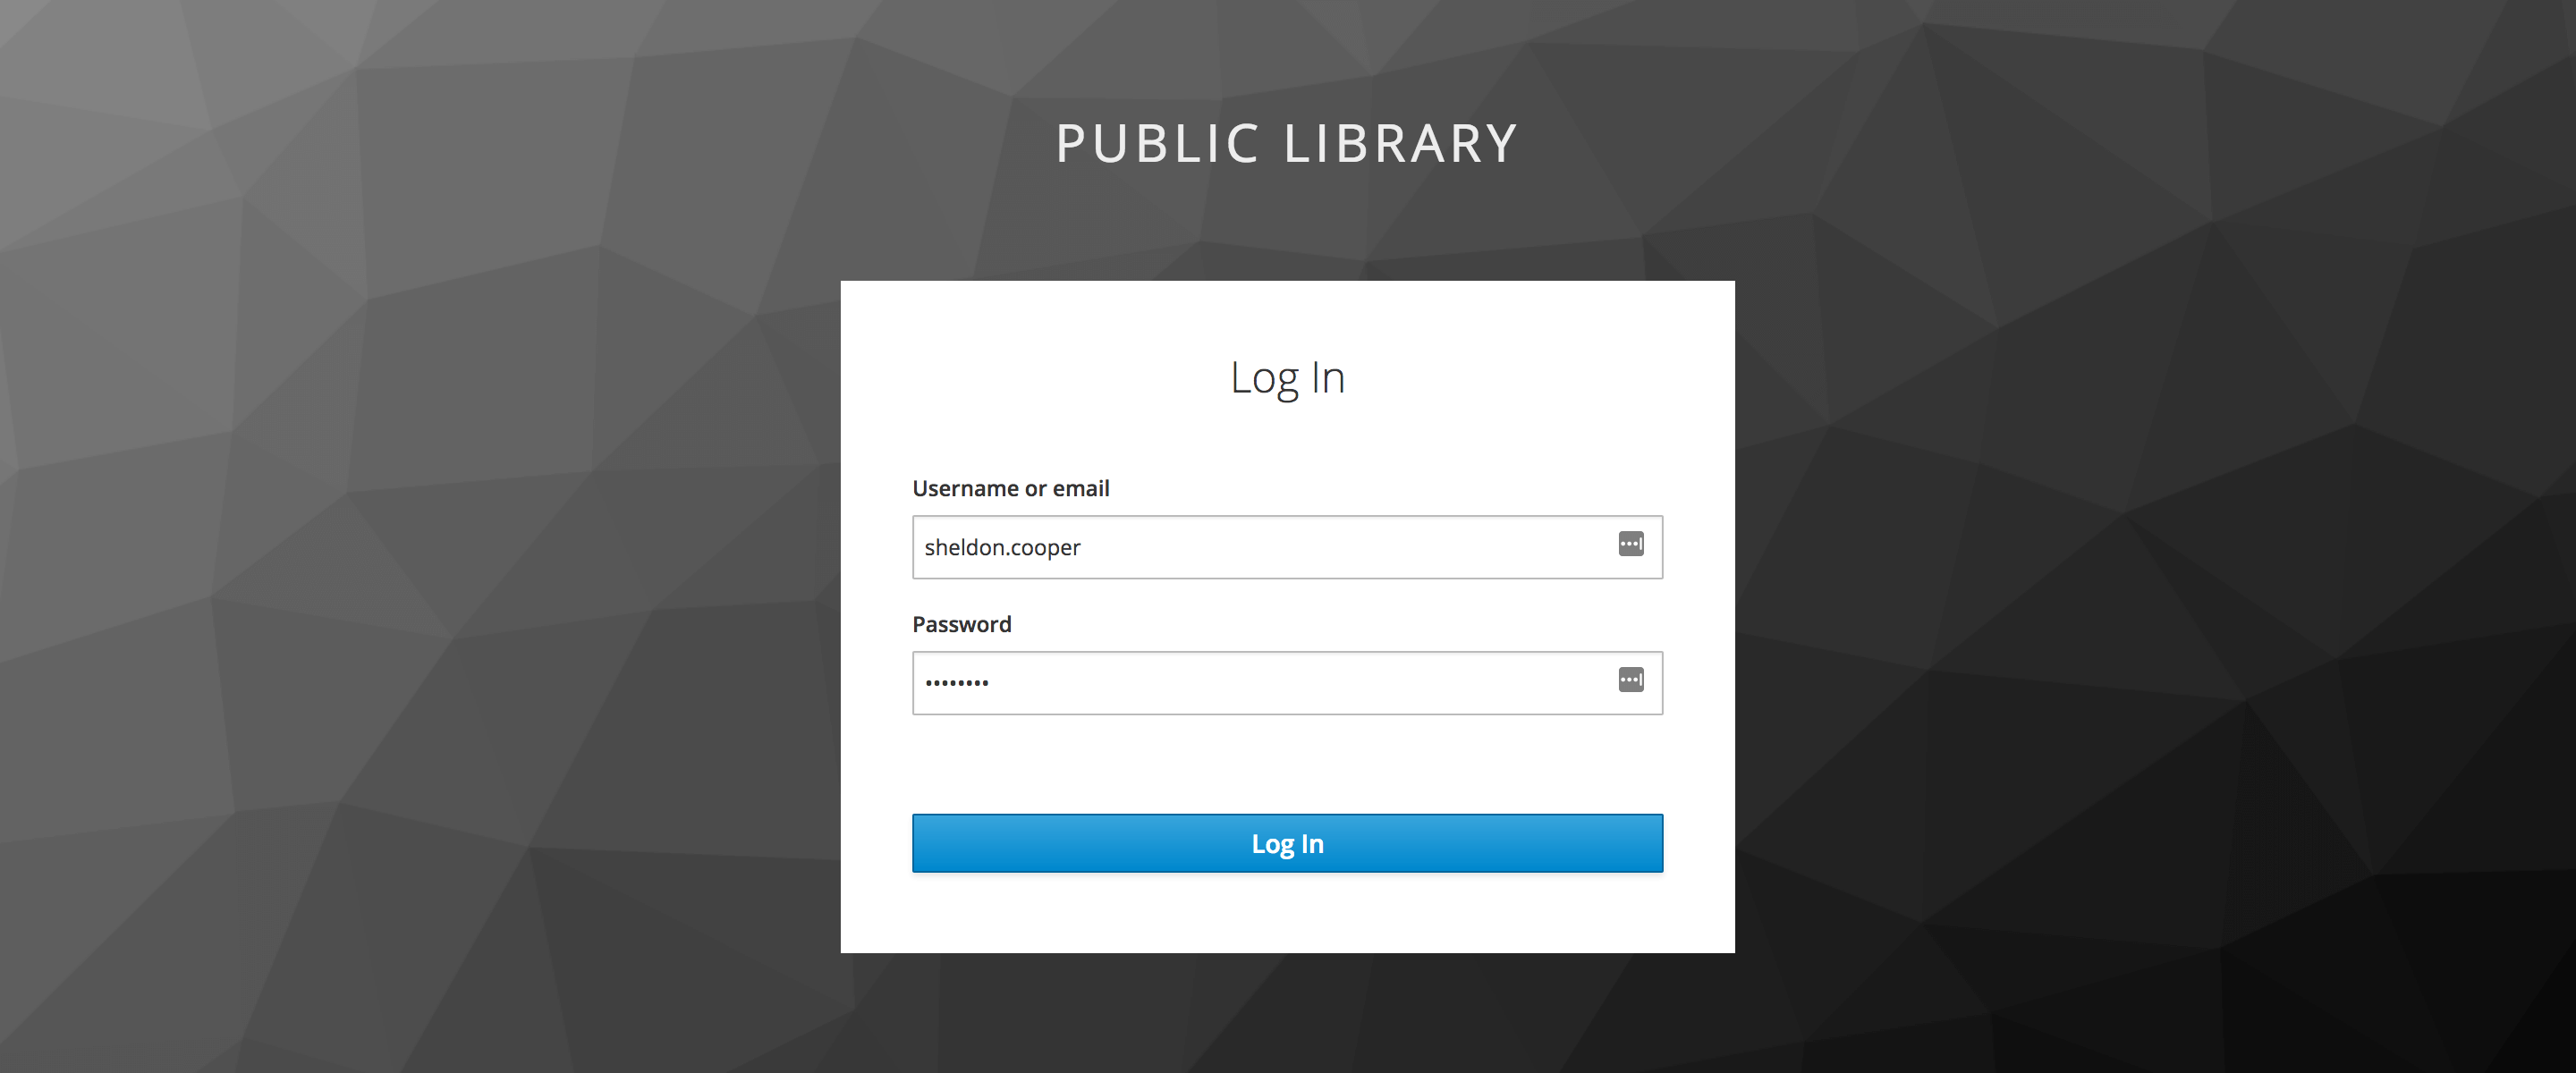 The form to fill in to log into the Keycloak user service